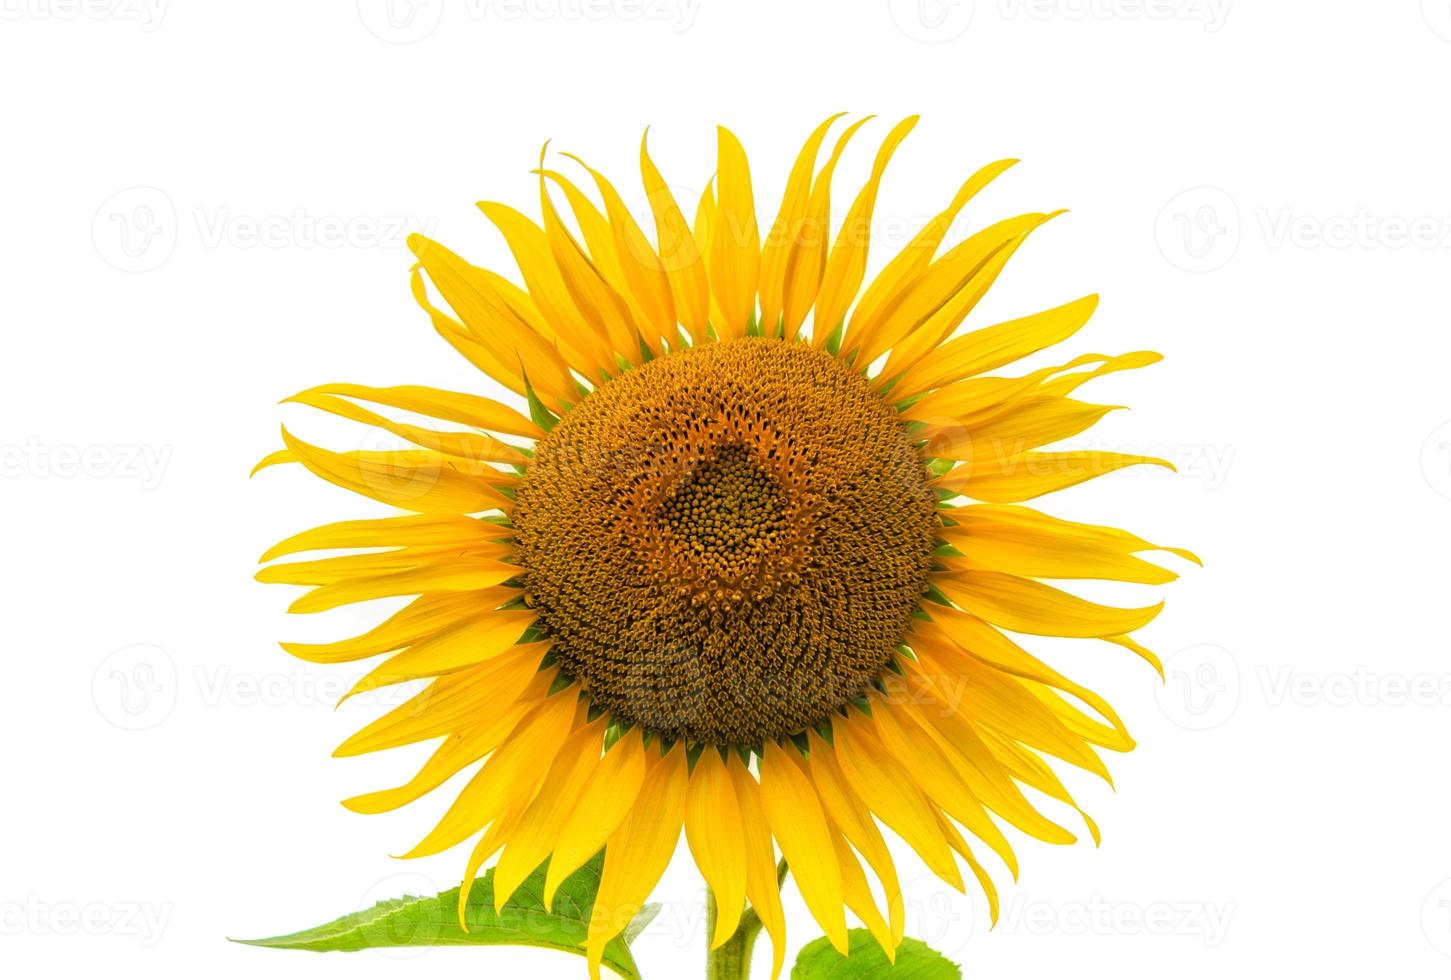 Sunflower on a white background photo